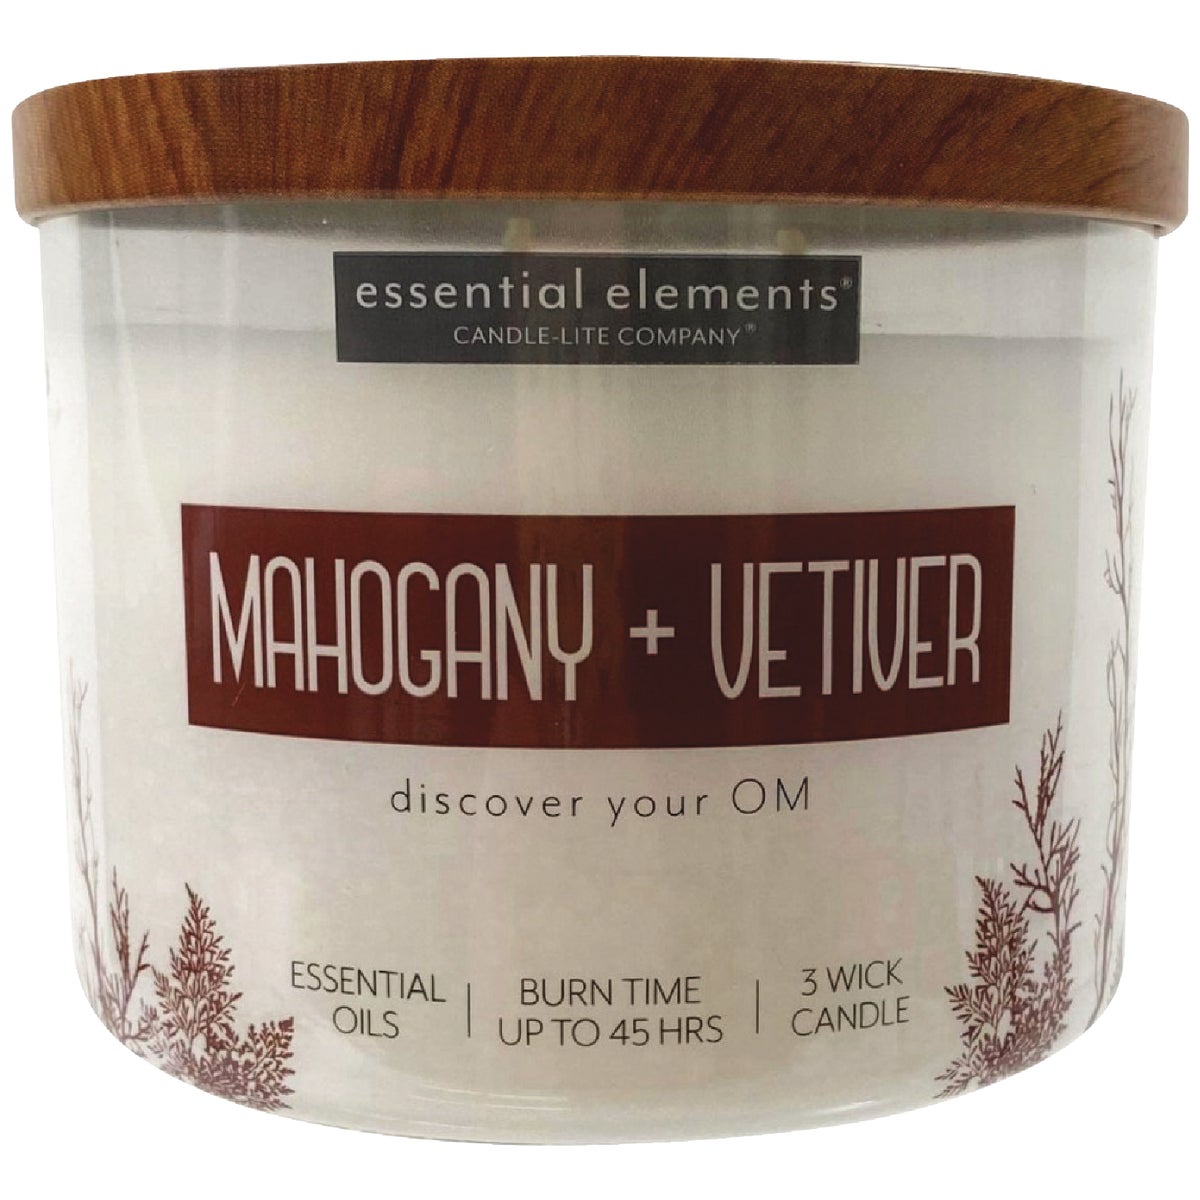 Essential Elements Candle Lite 4574293 Candle Lite Essential Elements 14.75 Oz. Mahogany & Vetiver Jar Candle with Lid 4574293